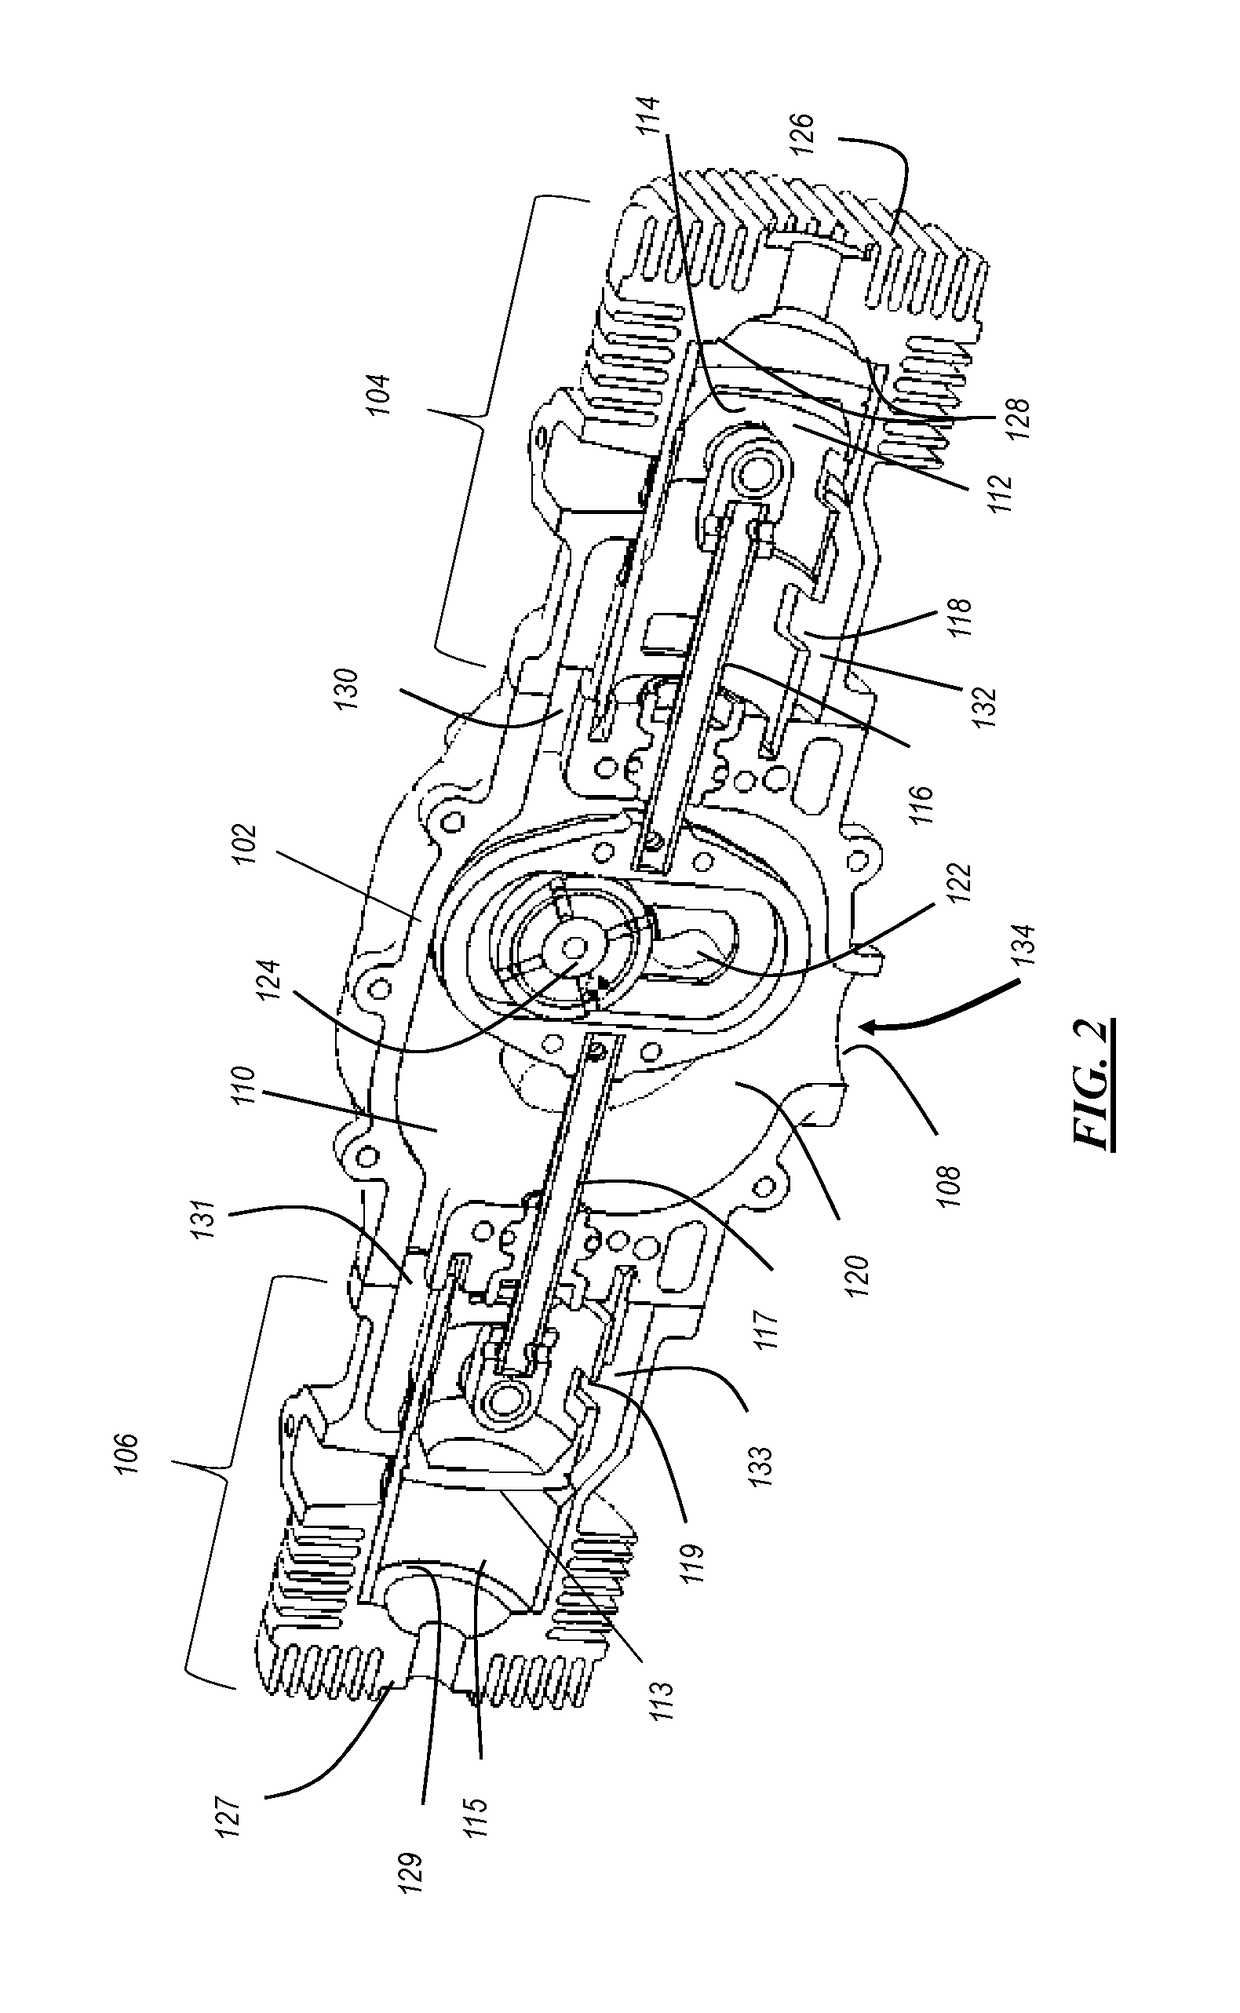 Internal combustion engine with coaxially aligned pistons